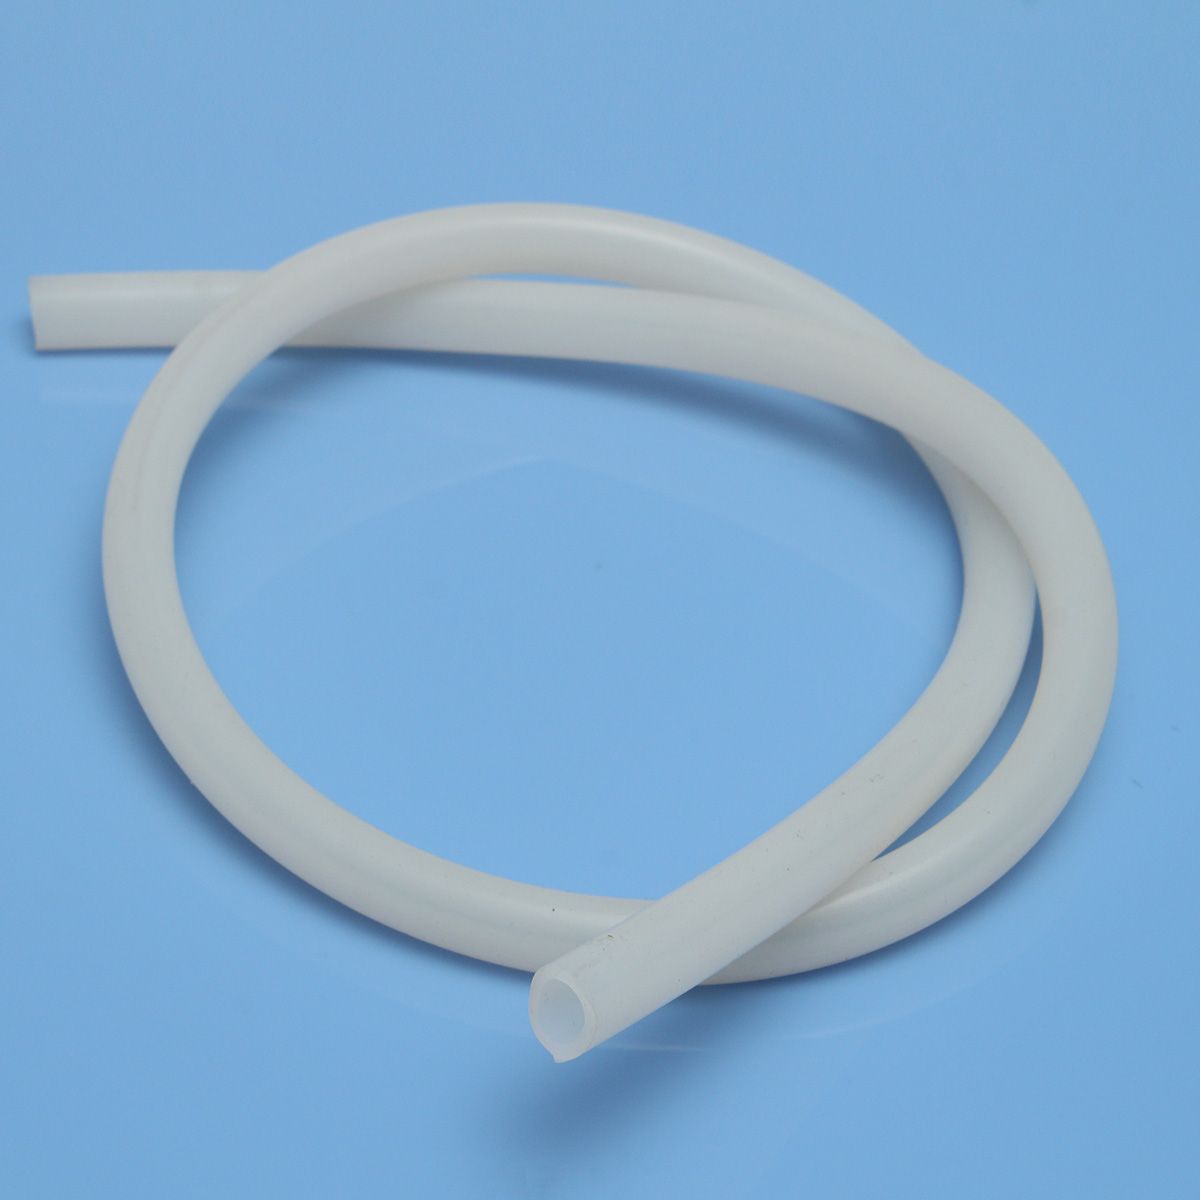 15x19mm10x14mm-Silicone-Hose-Flexible-Tube-Pipe-Beer-Water-Air-Pump-Hose-1m-1342354